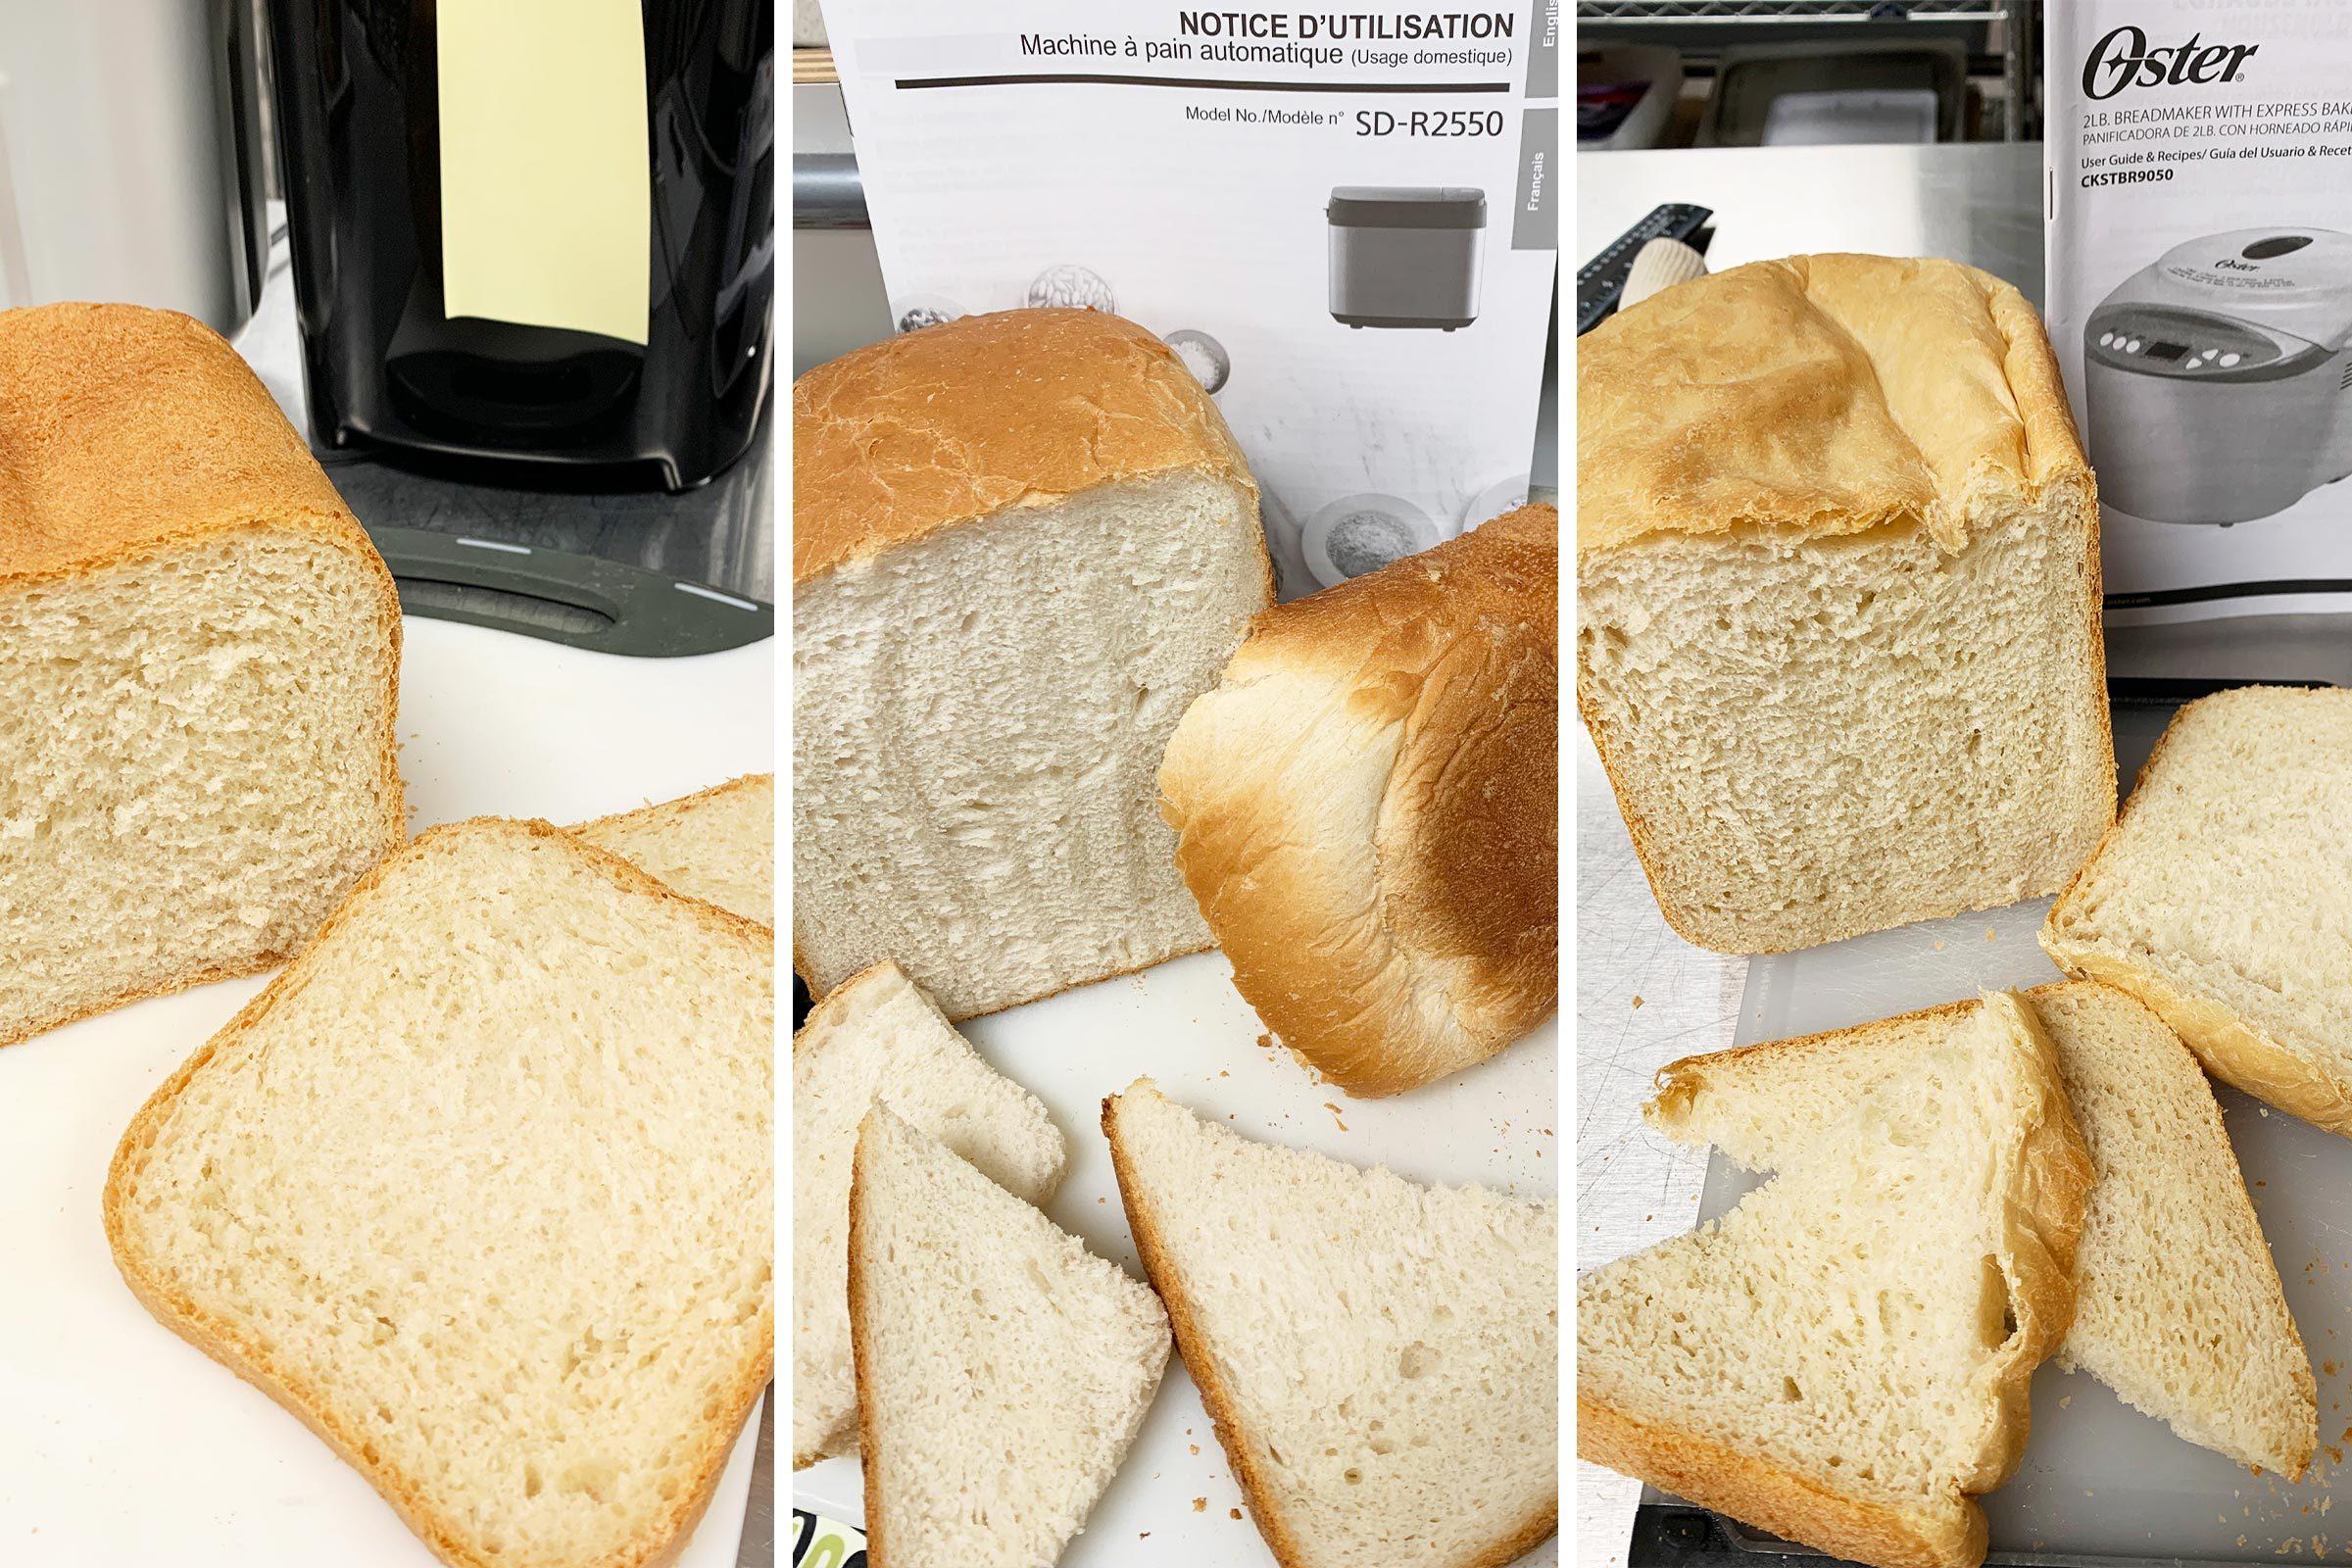 Best bread makers: Use these machines to bake your own bread at home